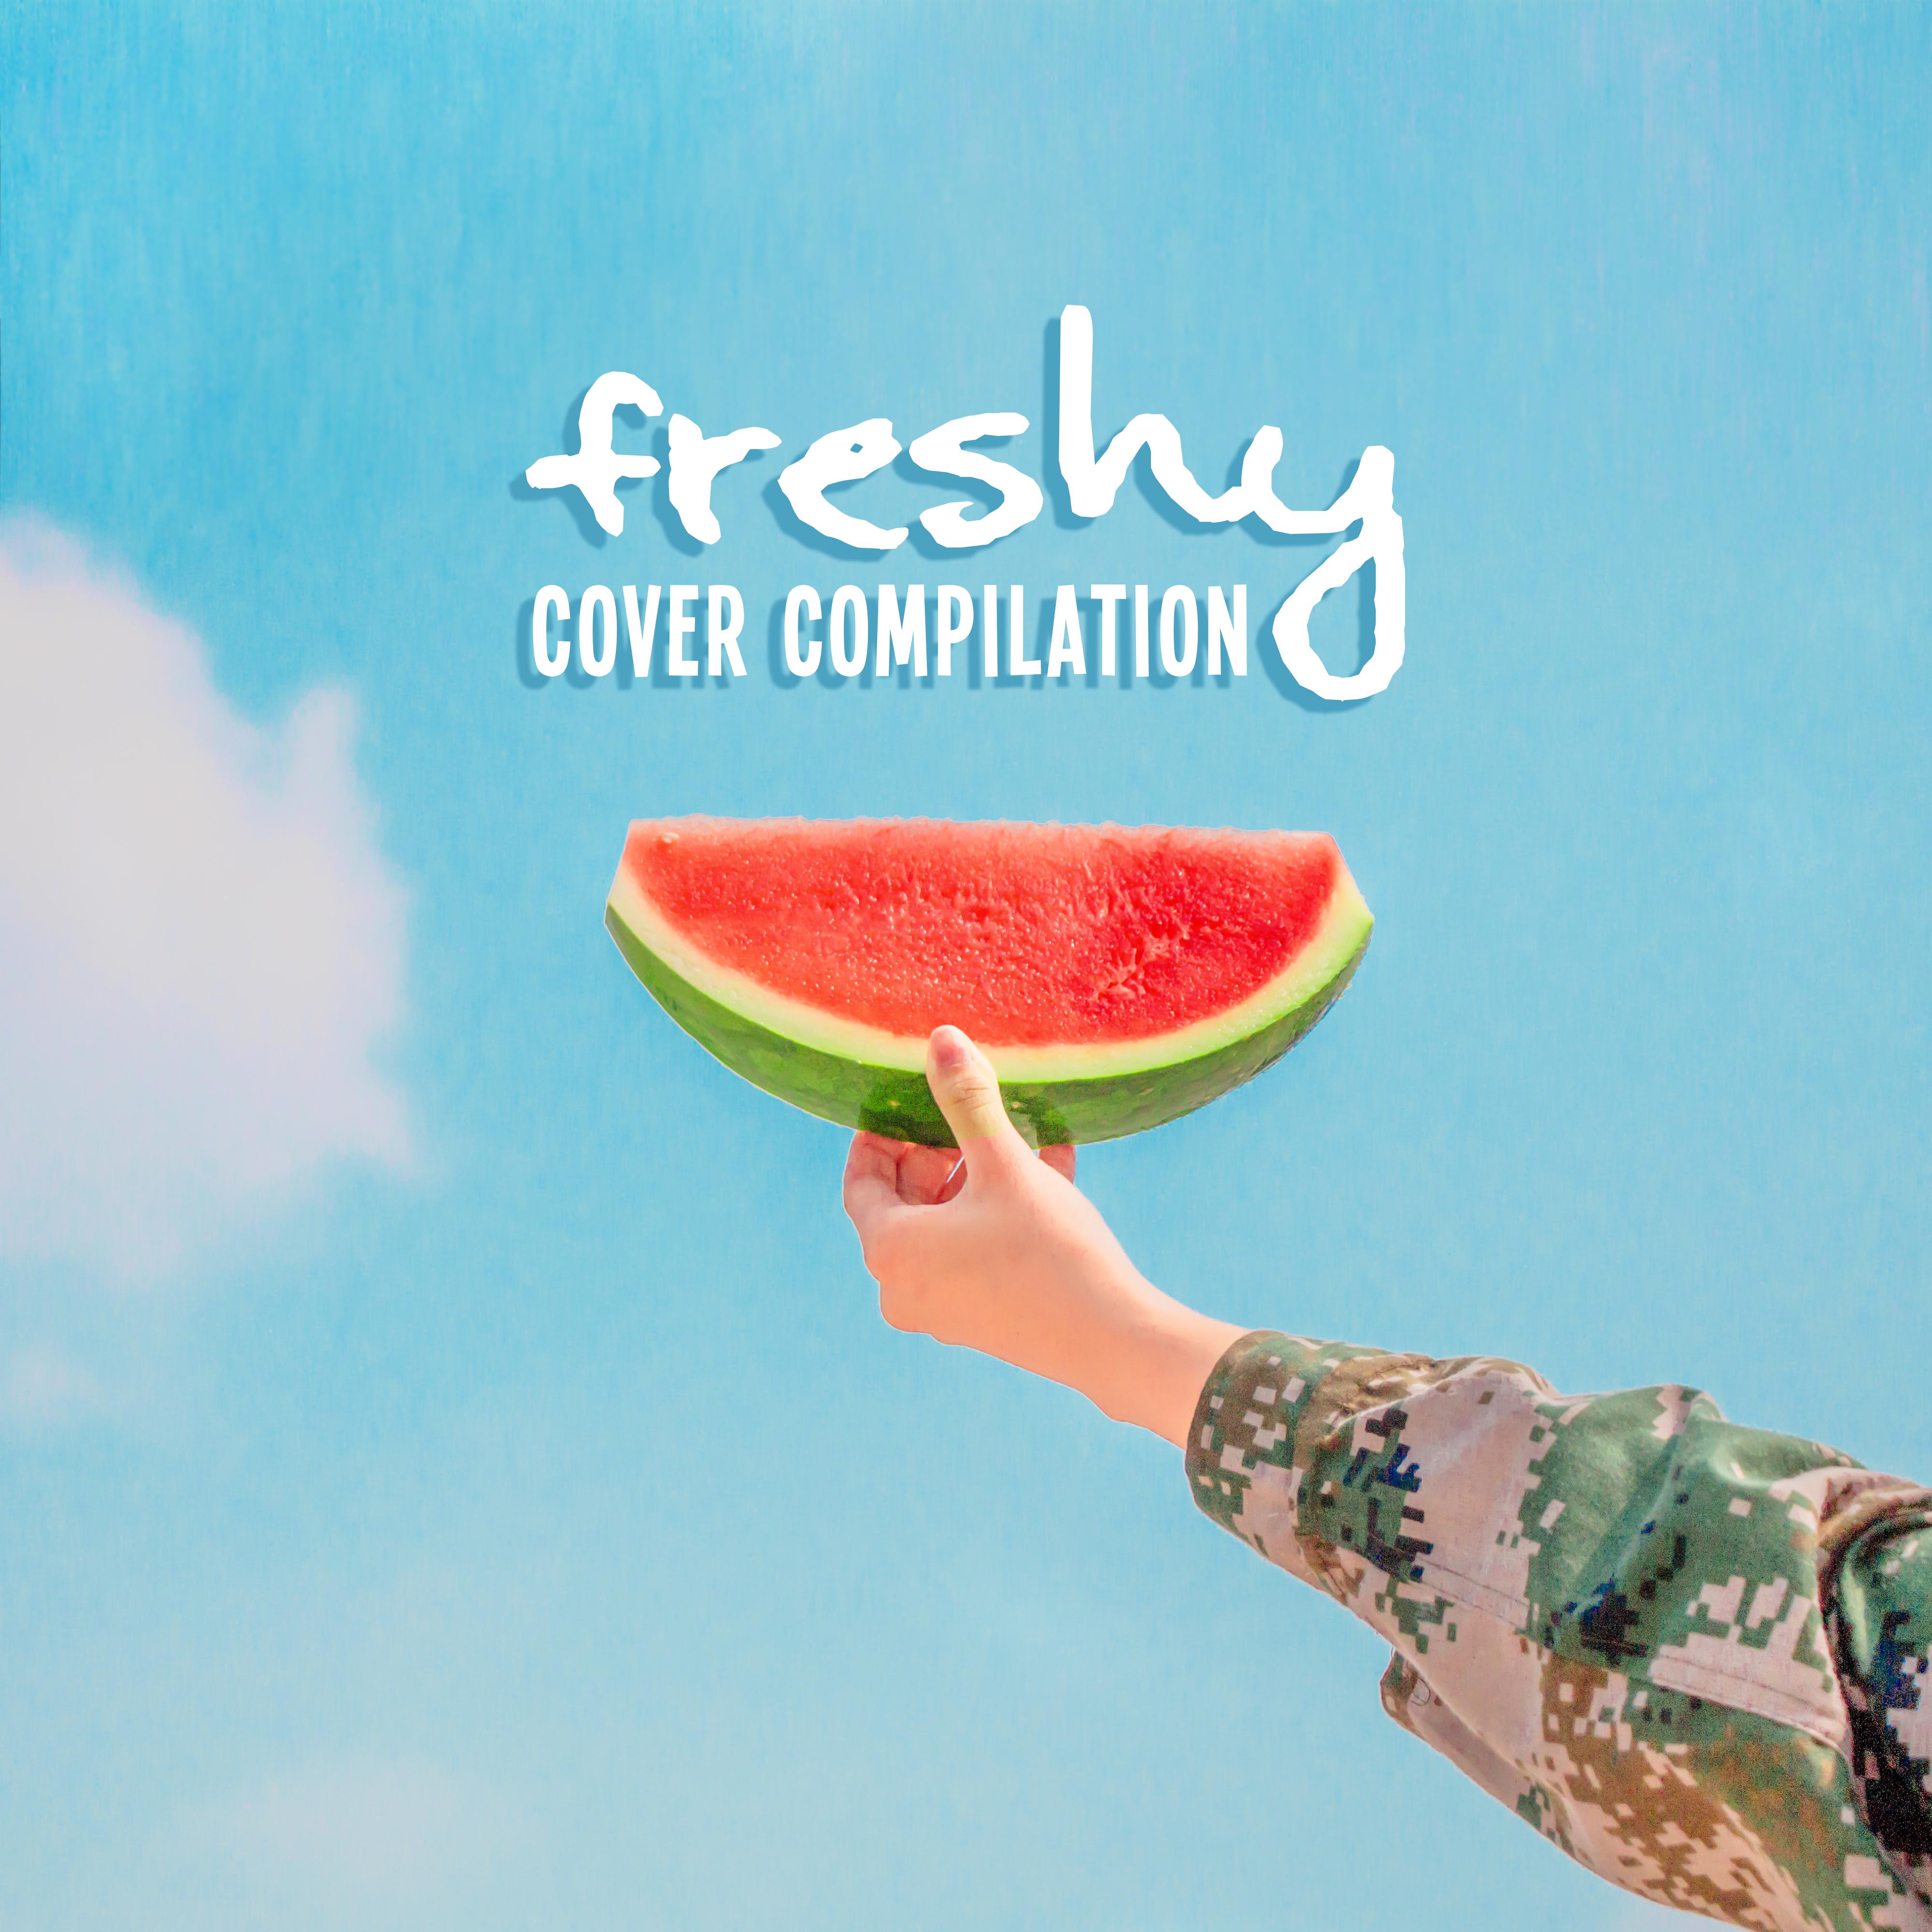 Freshy Cover Compilation: 2019 Instrumental Covers of Popular & Classic Melodies Played on Piano, Guitar & Violin